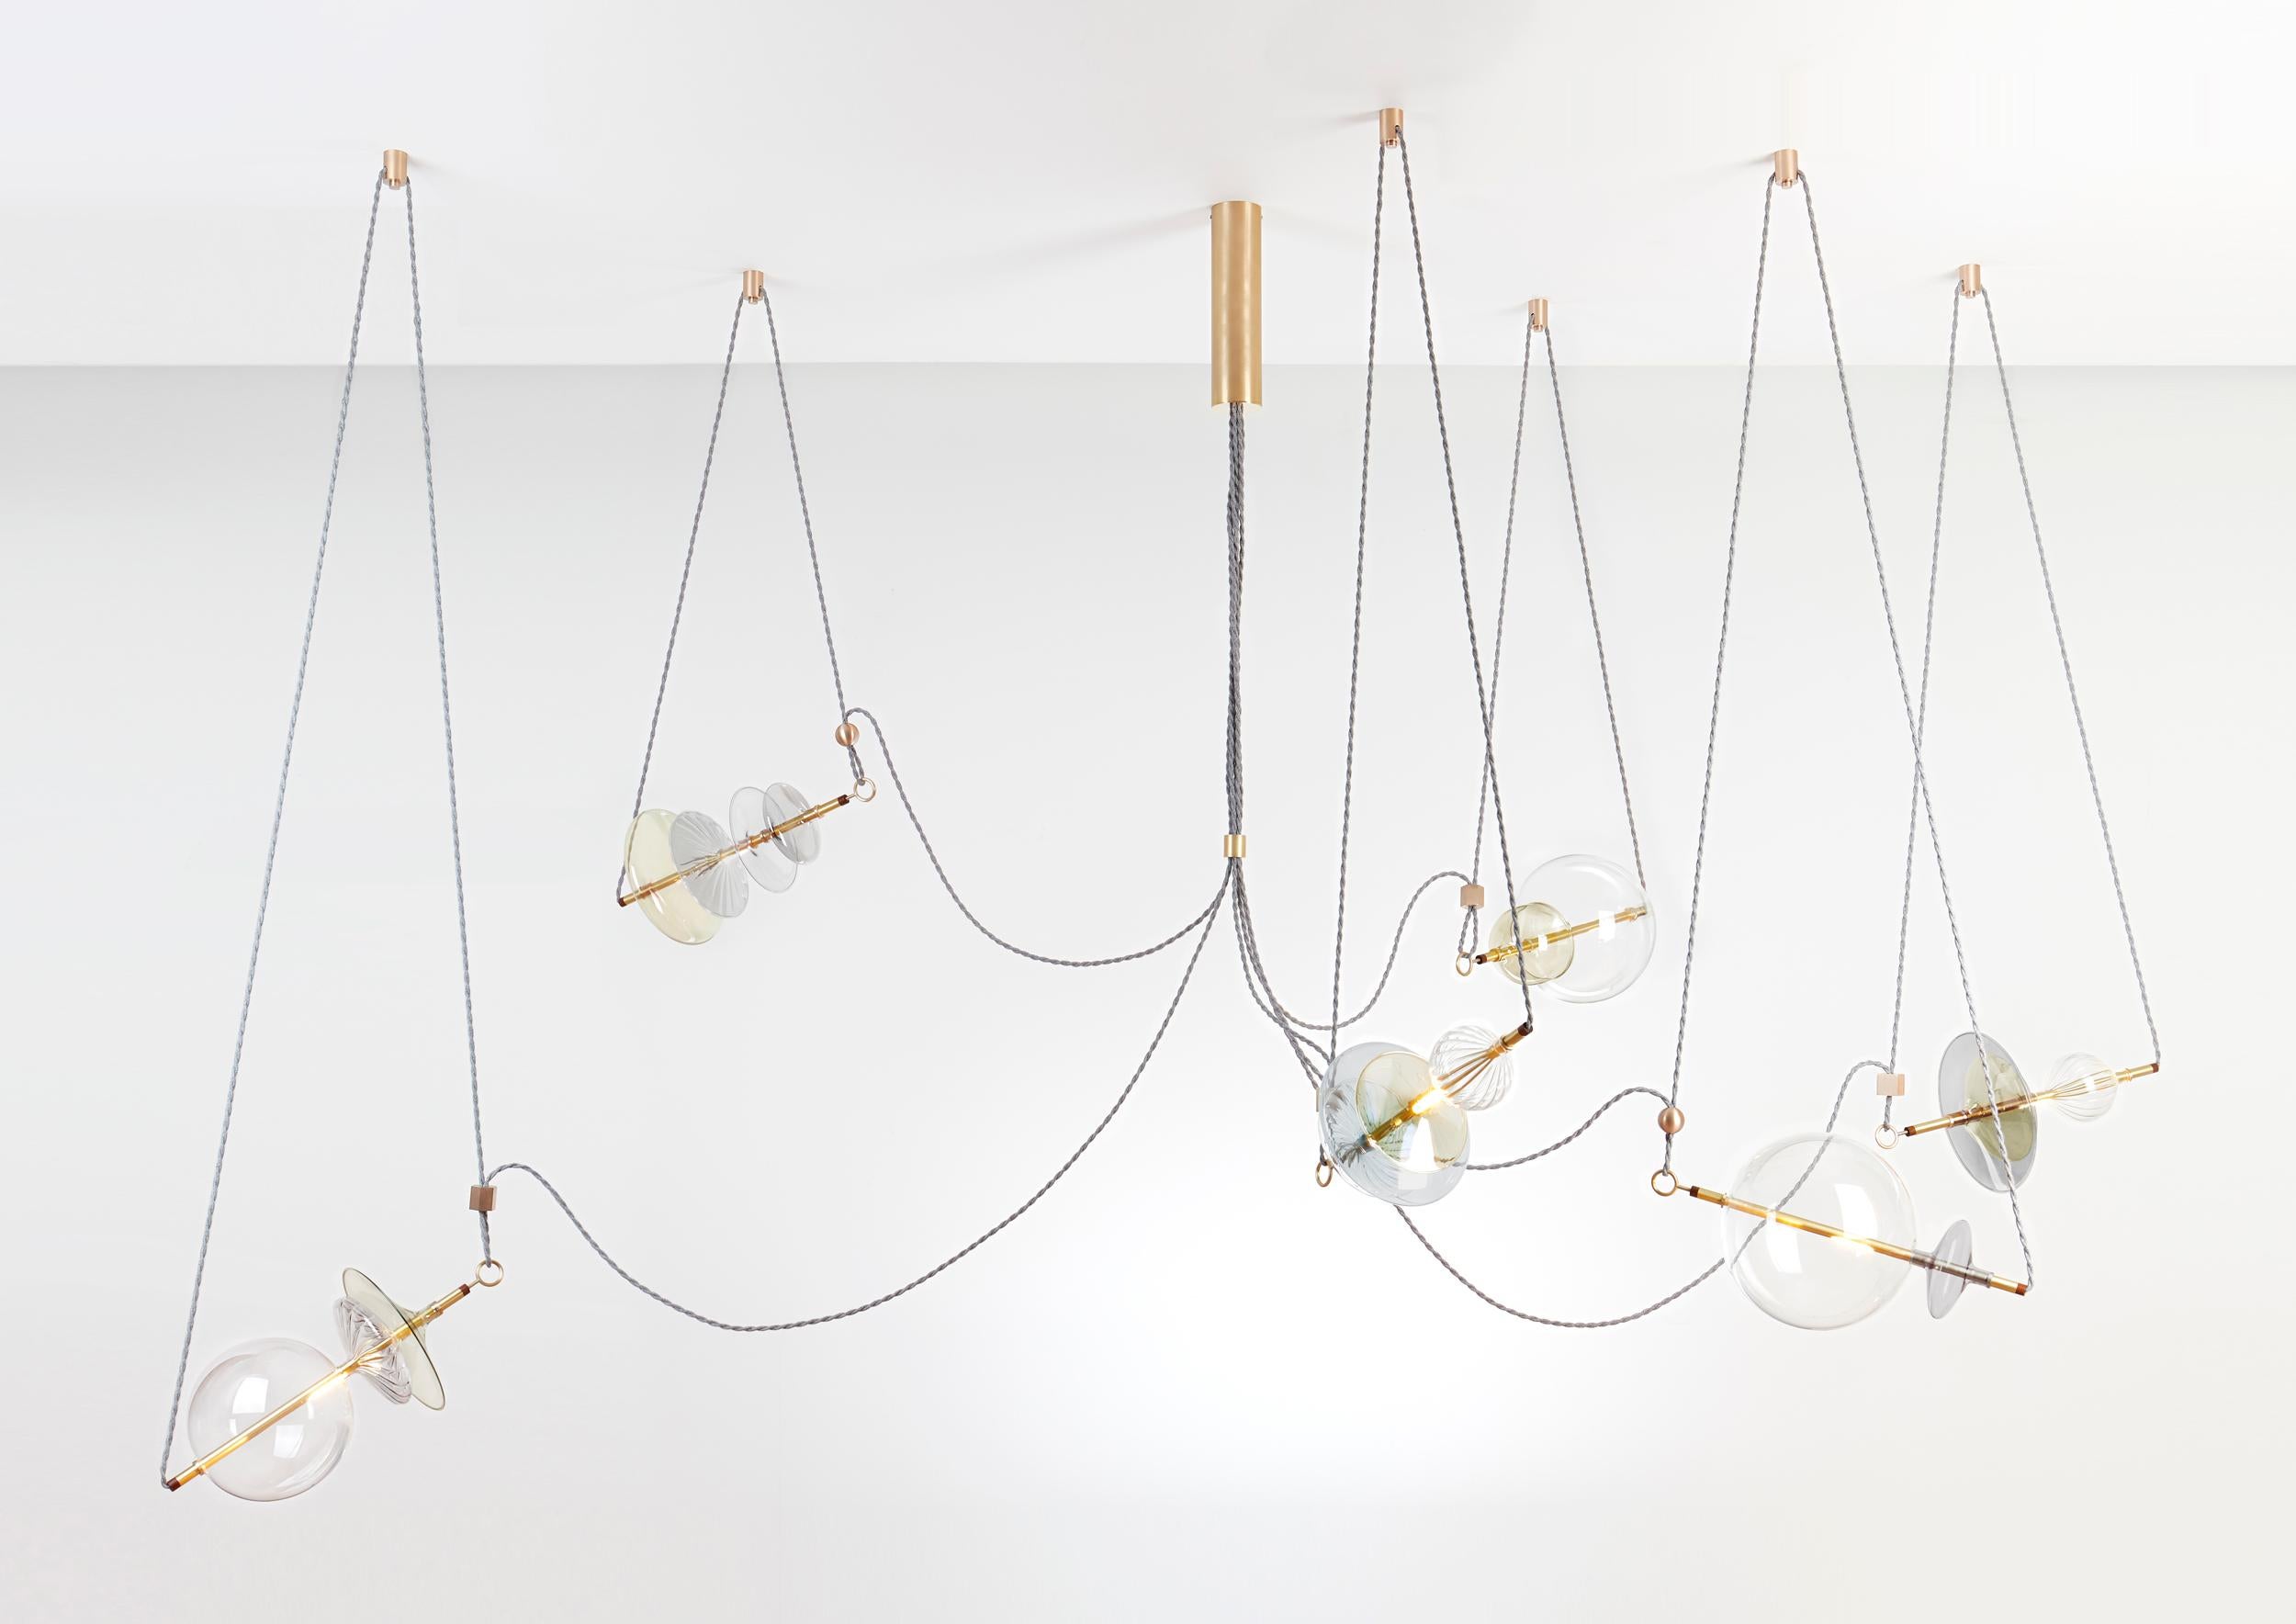 The Trapezi contemporary chandelier is inspired by the idea of a Circus Trapeze Artist.

Hand blown glass in a variety of forms and colors is combined with brass bars and hung by Linen Cords from hub units on the ceiling.
The glass is left